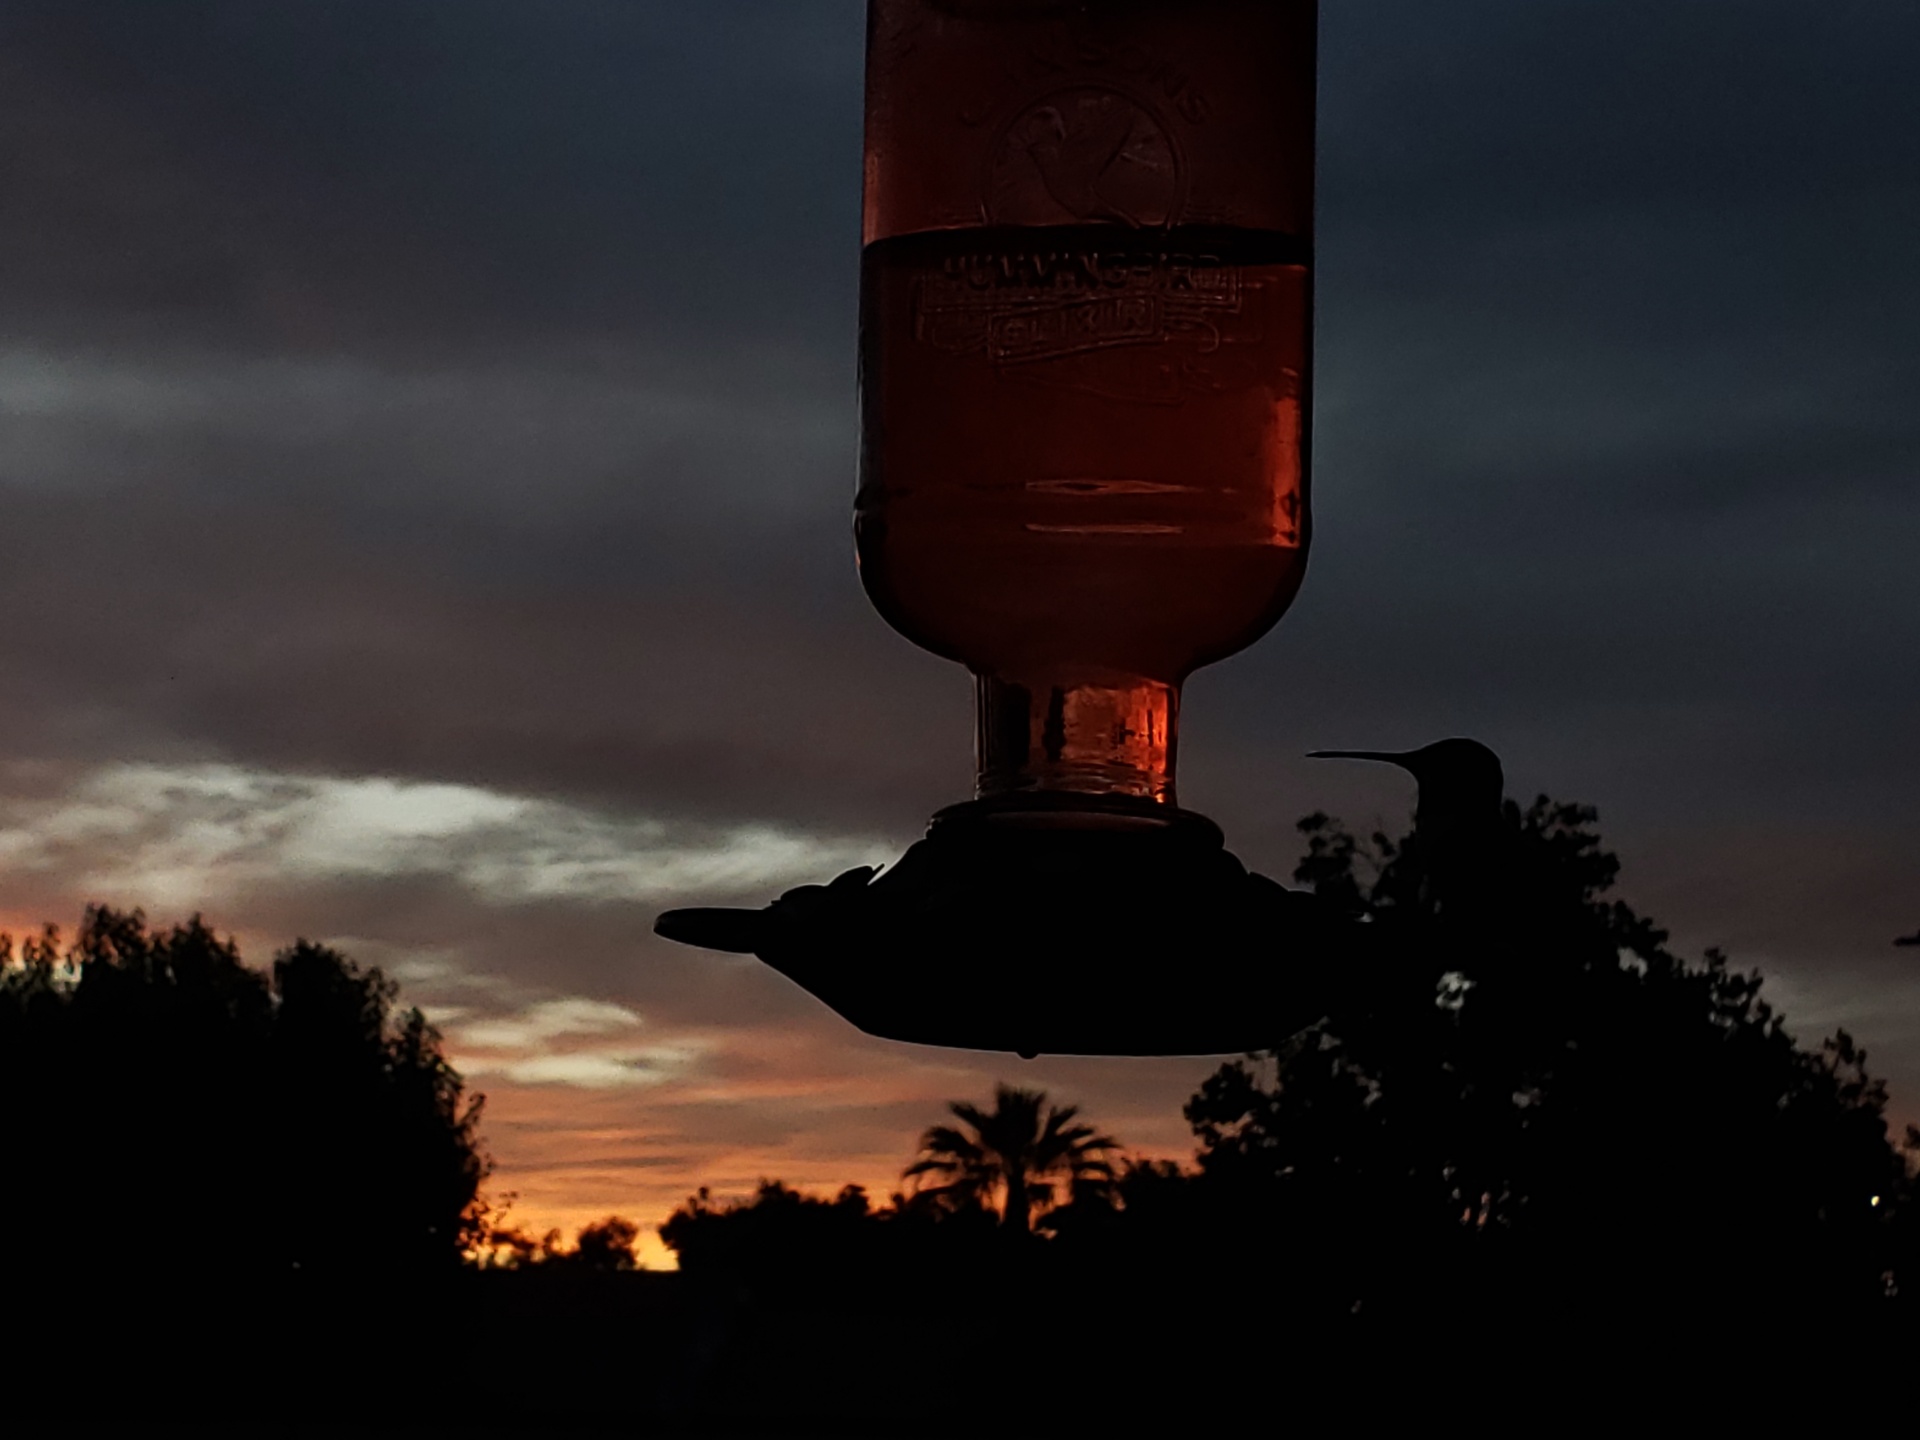 Hummingbird feeds in the early evening